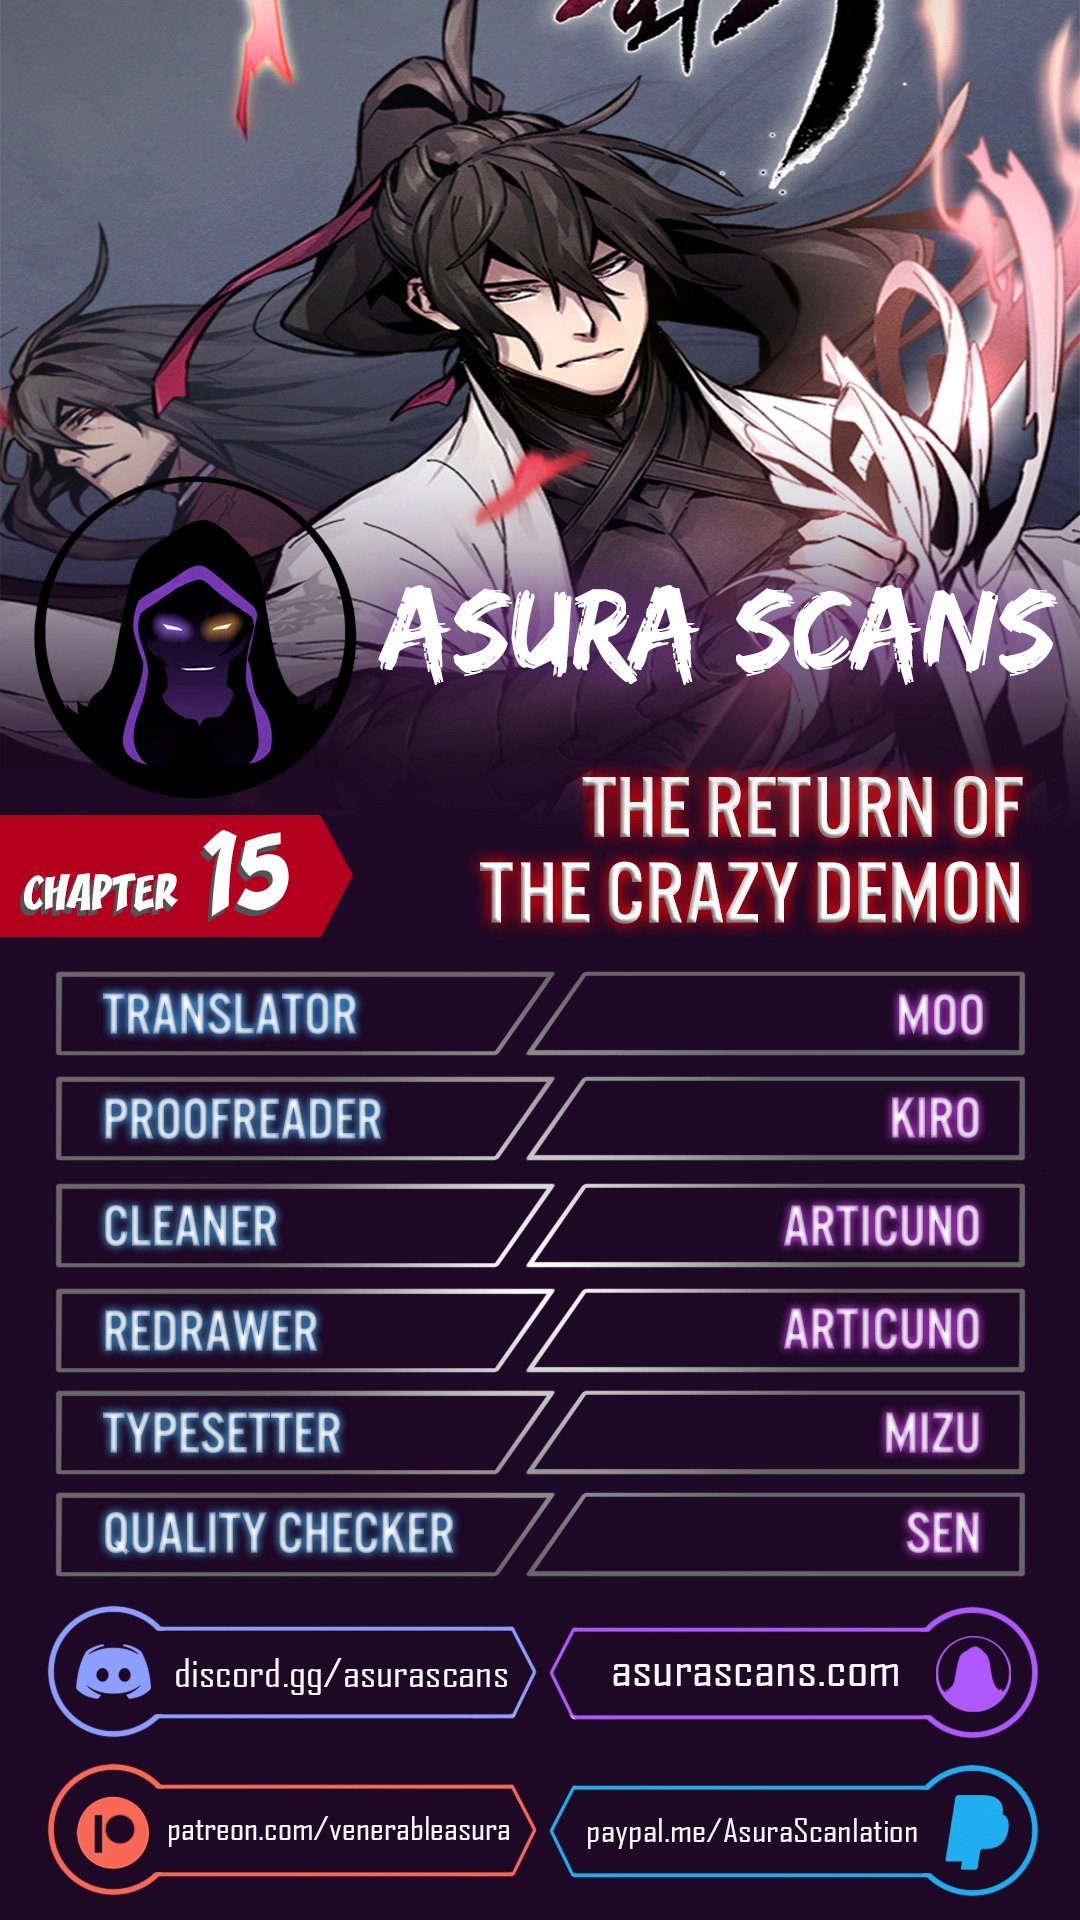 The Return of the Crazy Demon - Chapter 18556 - Image 1